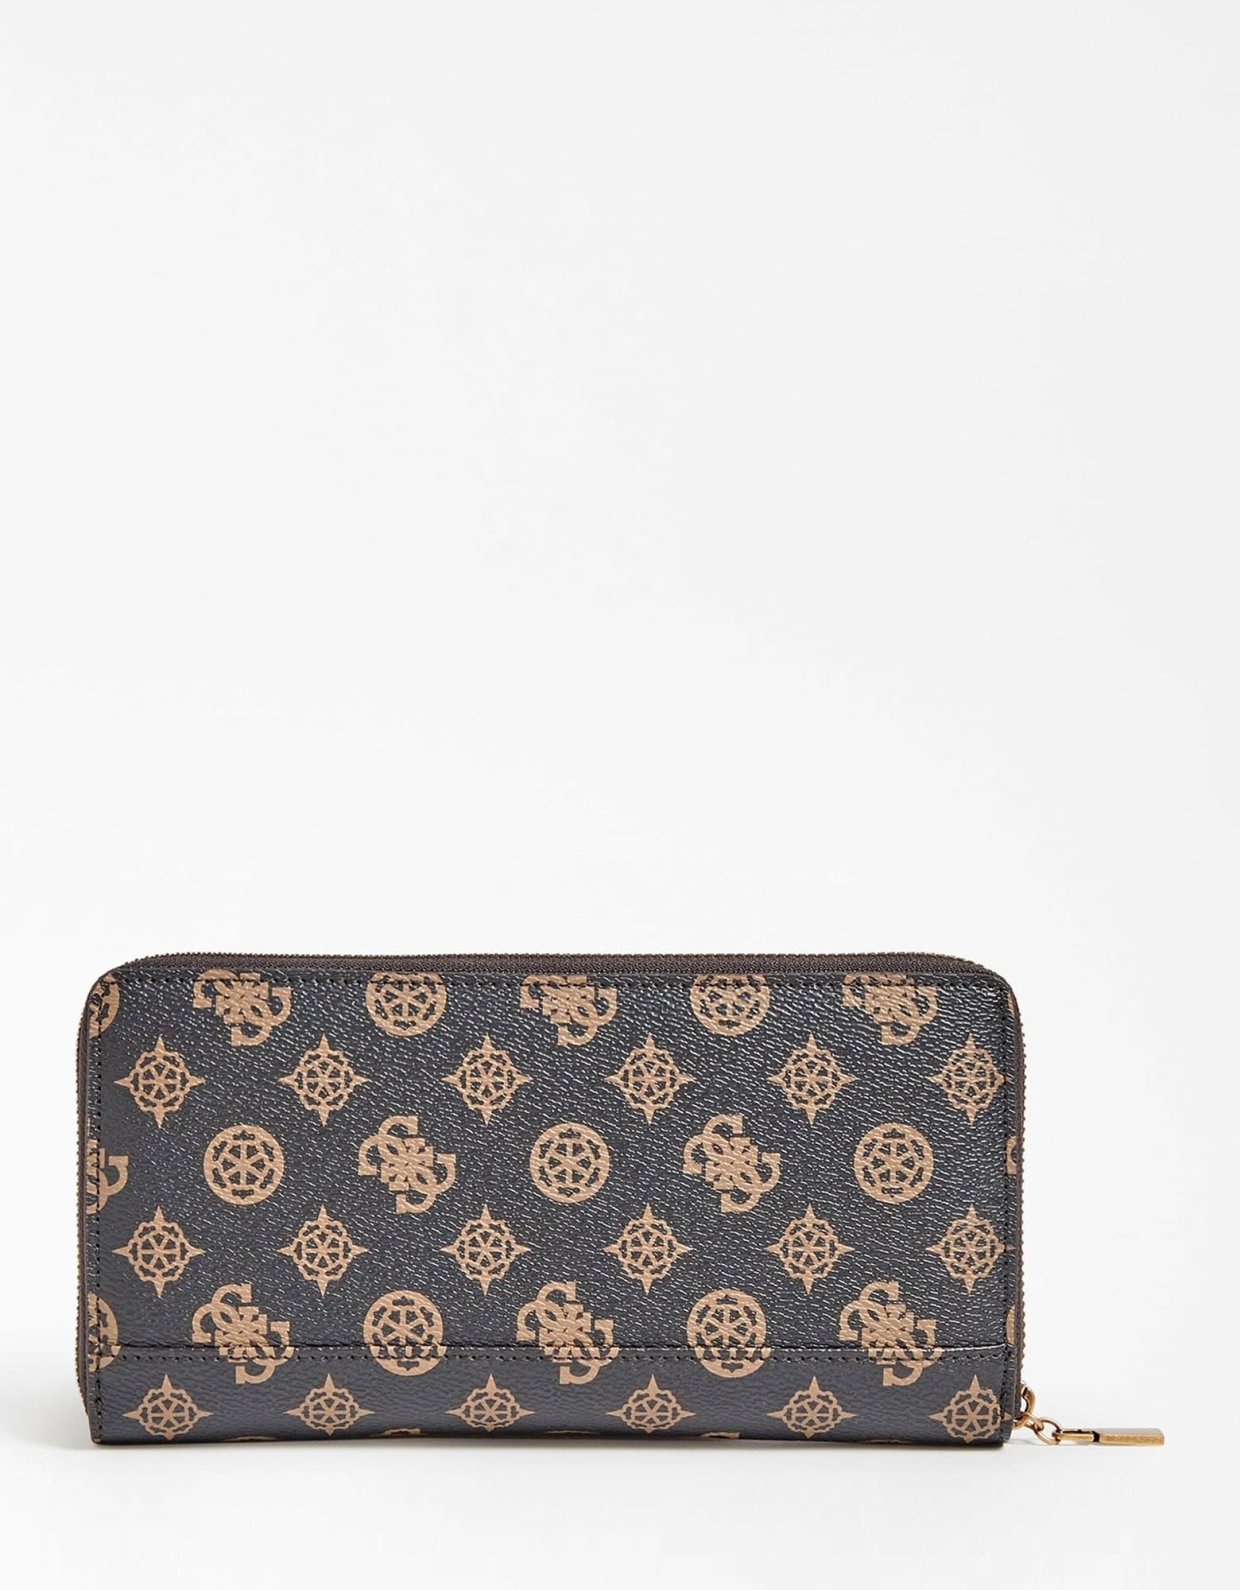 Guess Centre stage slg wallet mocha logo